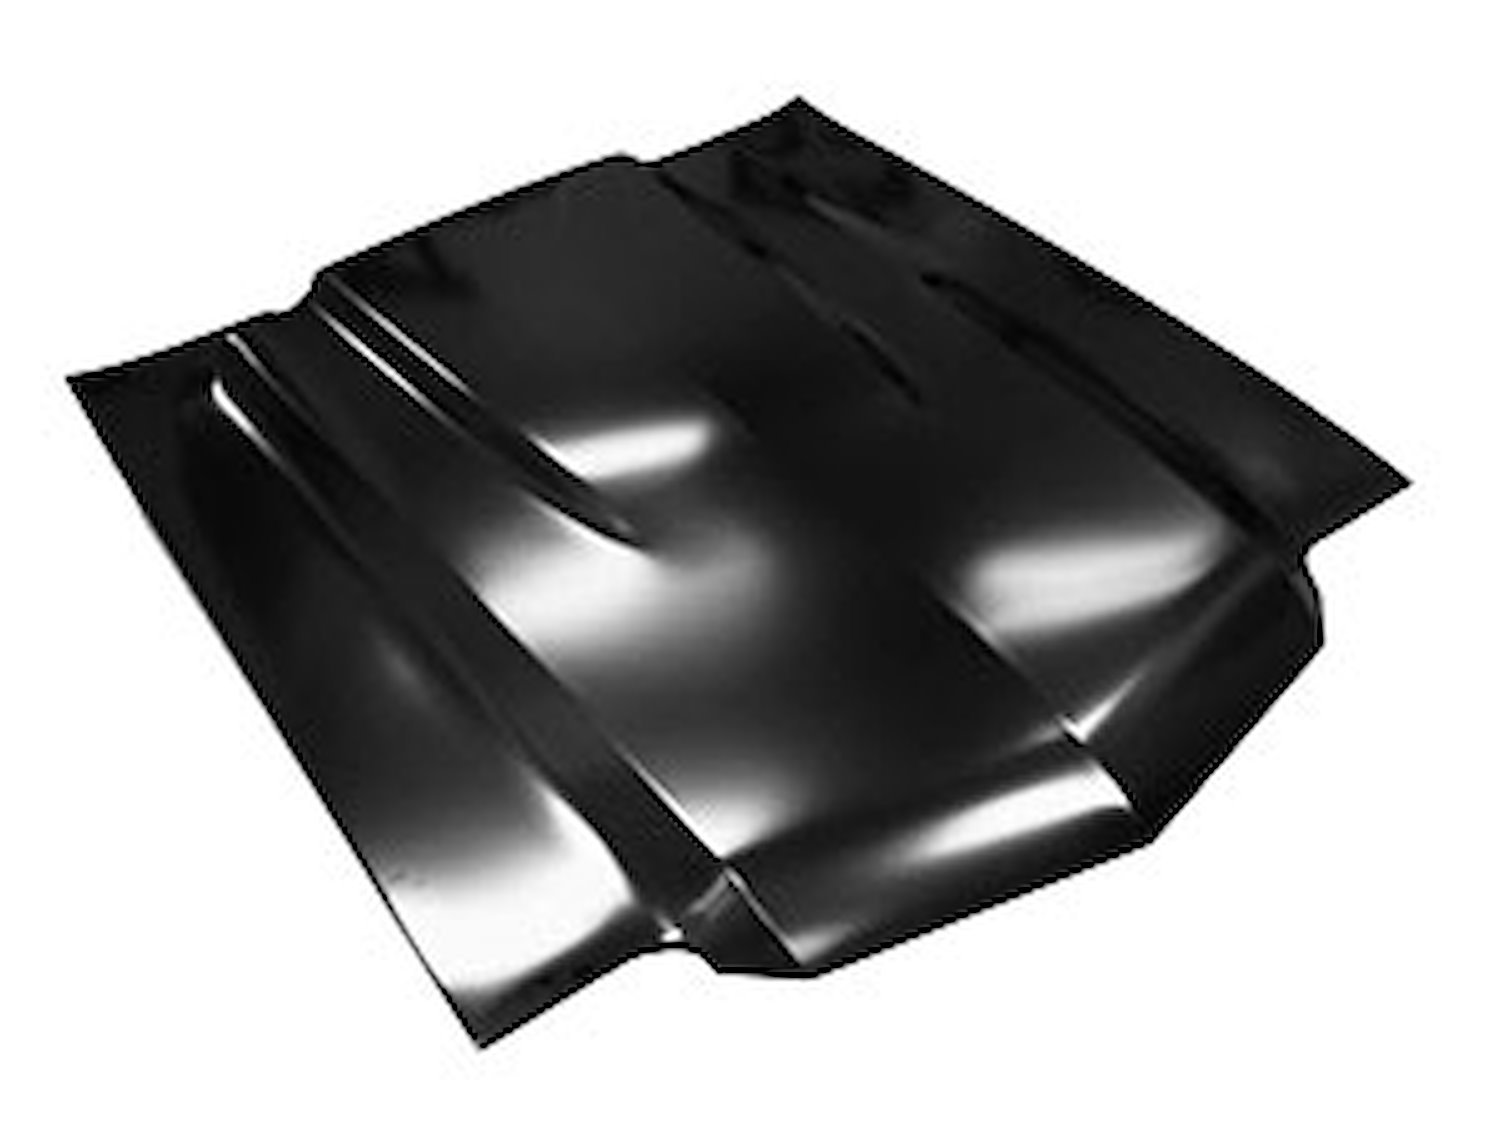 Steel Cowl Induction Hood for 1970-1972 Chevrolet Chevelle & El Camino